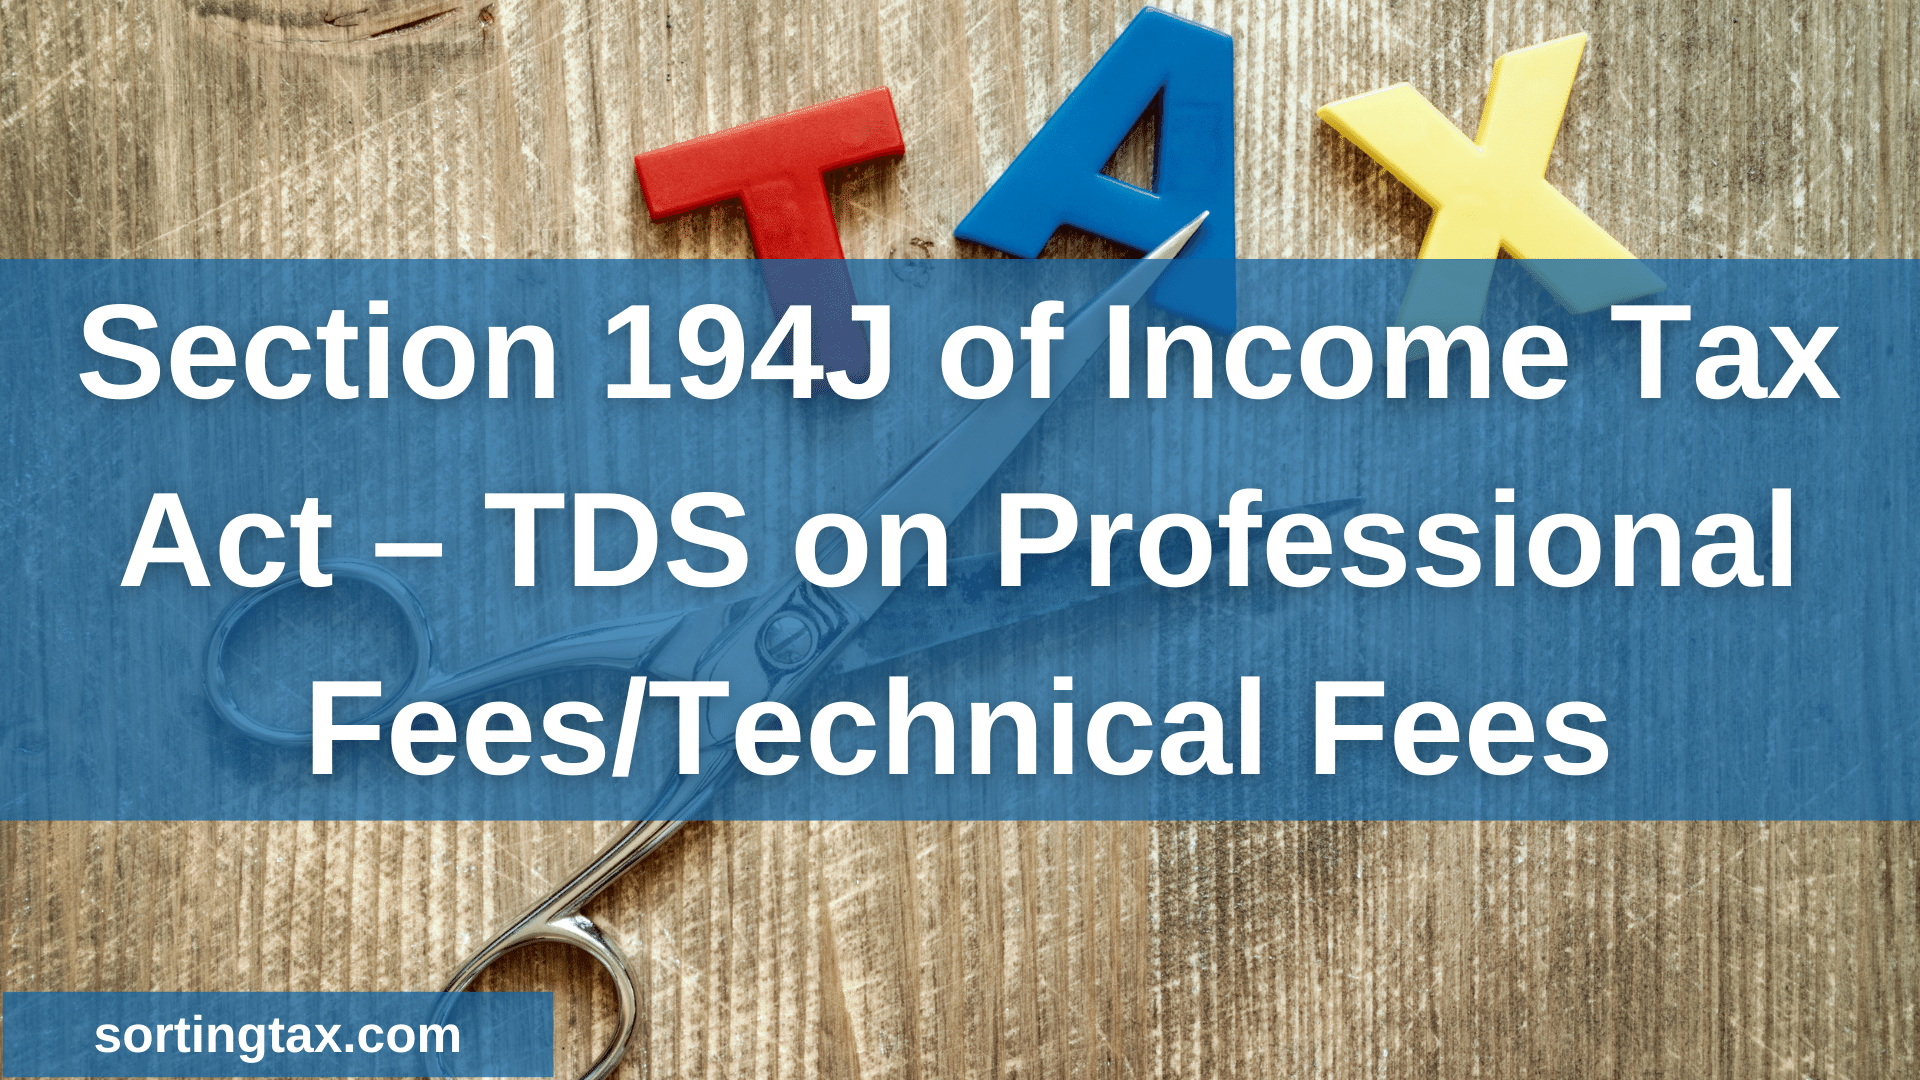 Section 194J of Income Tax Act – TDS on Professional Fees/Technical Fees